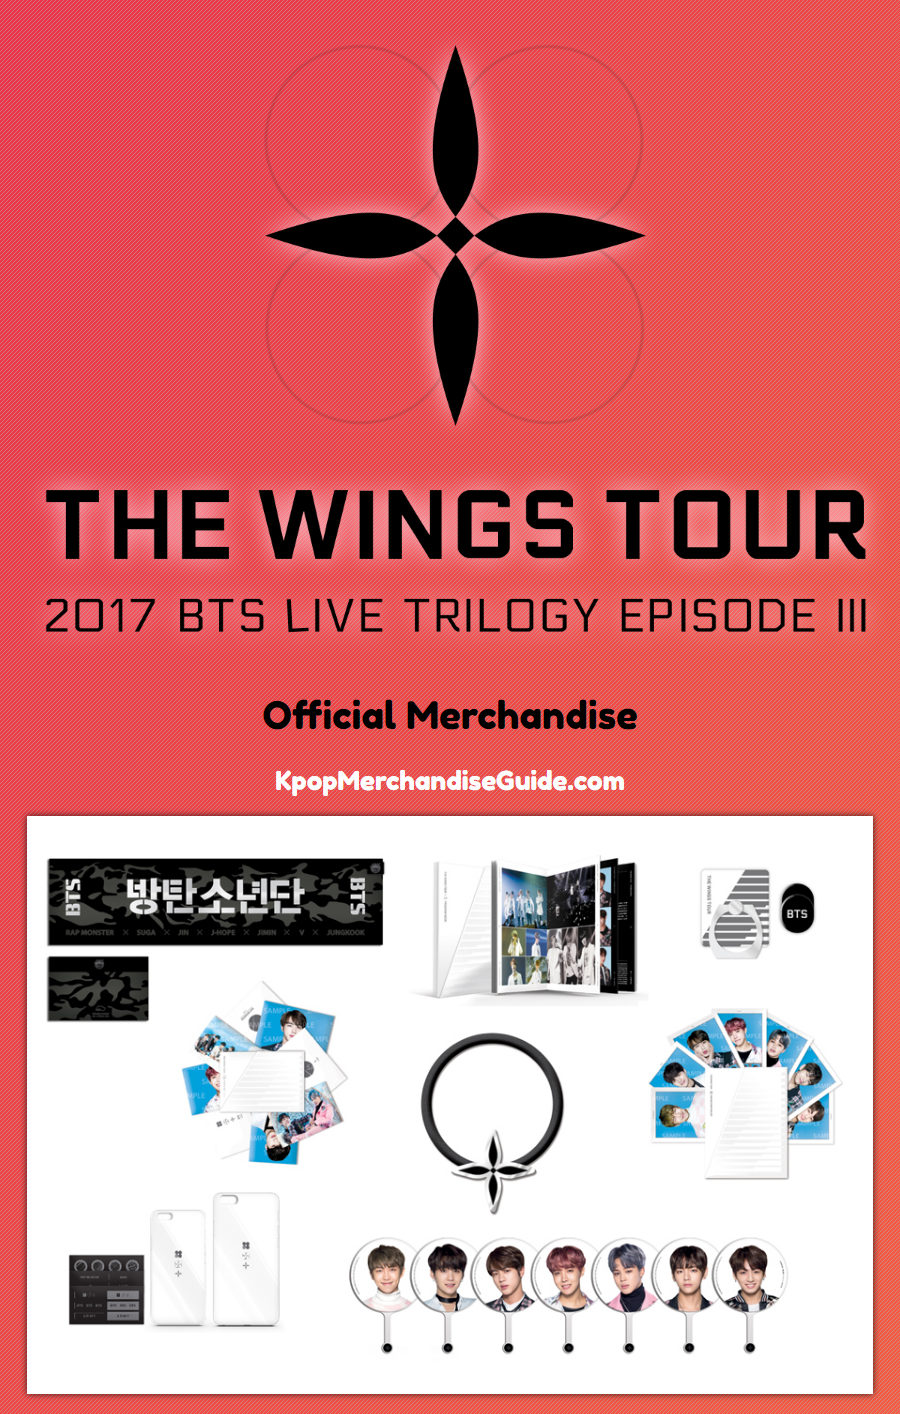 2017 BTS Live Trilogy Ep. III: The Wings Tour